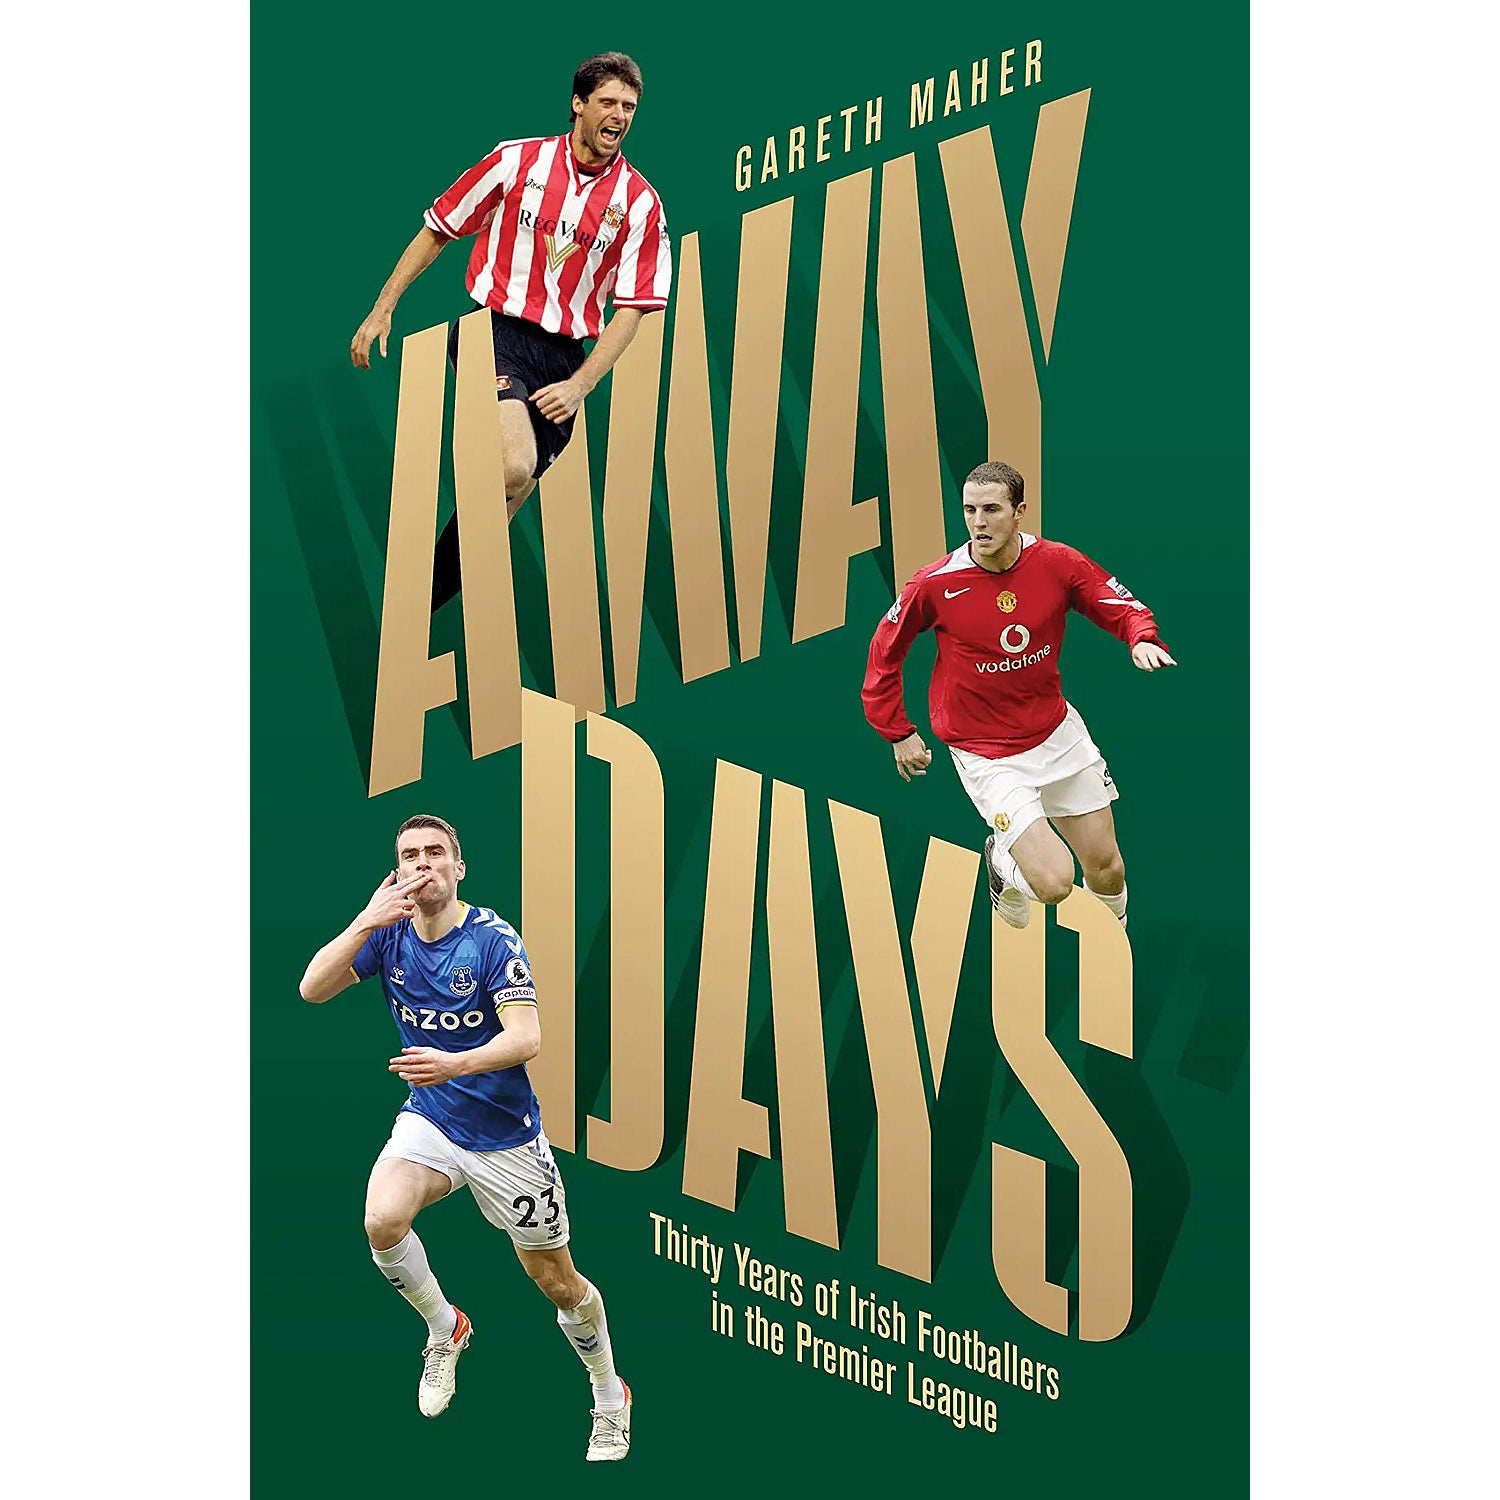 Away Days – Thirty Years of Irish Footballers in the Premier League